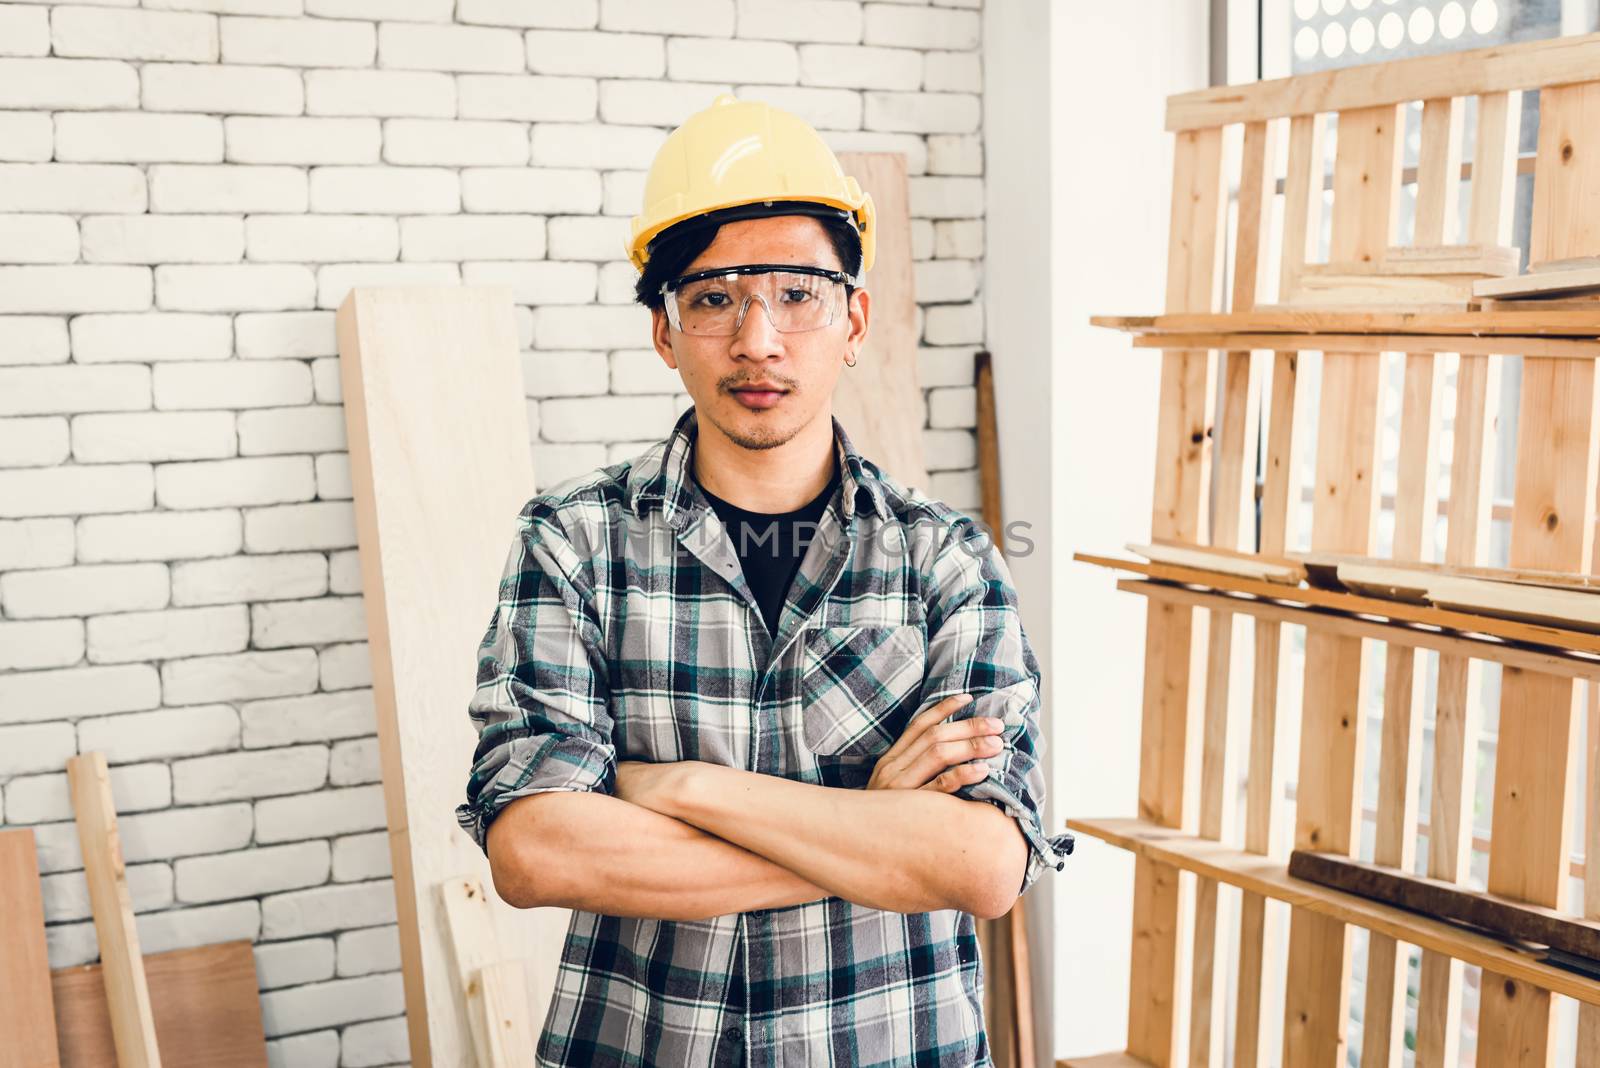 Carpenter Handyman Occupation and Skill Worker Concept, Portrait of Asian Carpentry Man in Personal Safety Equipment Tools Standing Arm Crossed in Workshop Room. Career Workmanship